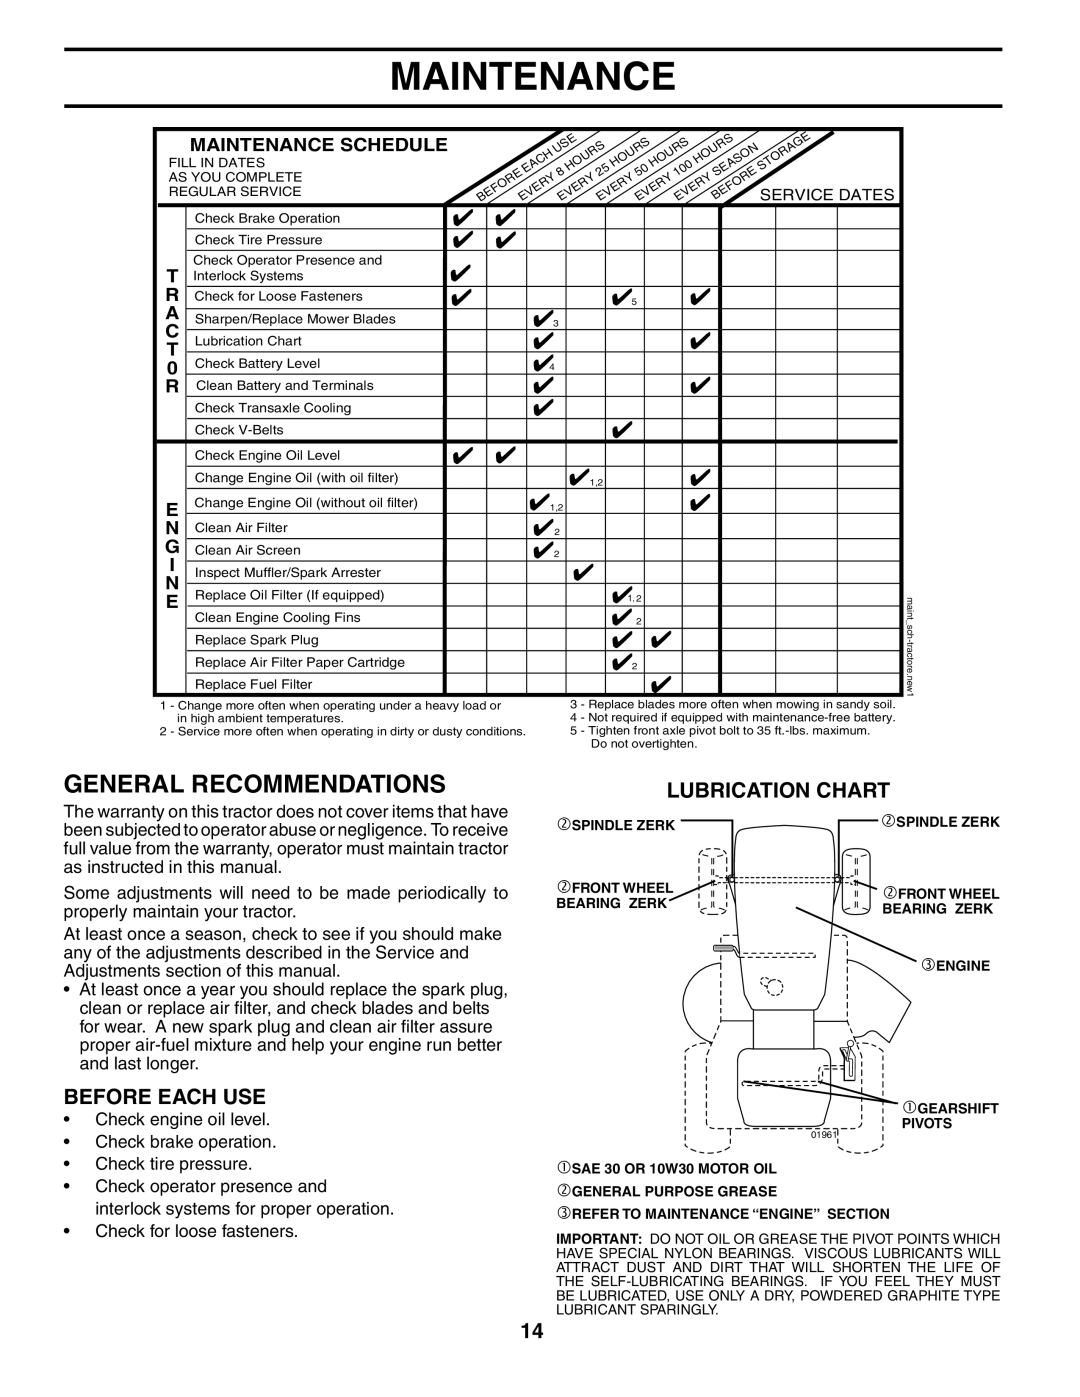 Weed Eater 191064 manual General Recommendations, Before Each Use, Lubrication Chart, Maintenance Schedule 